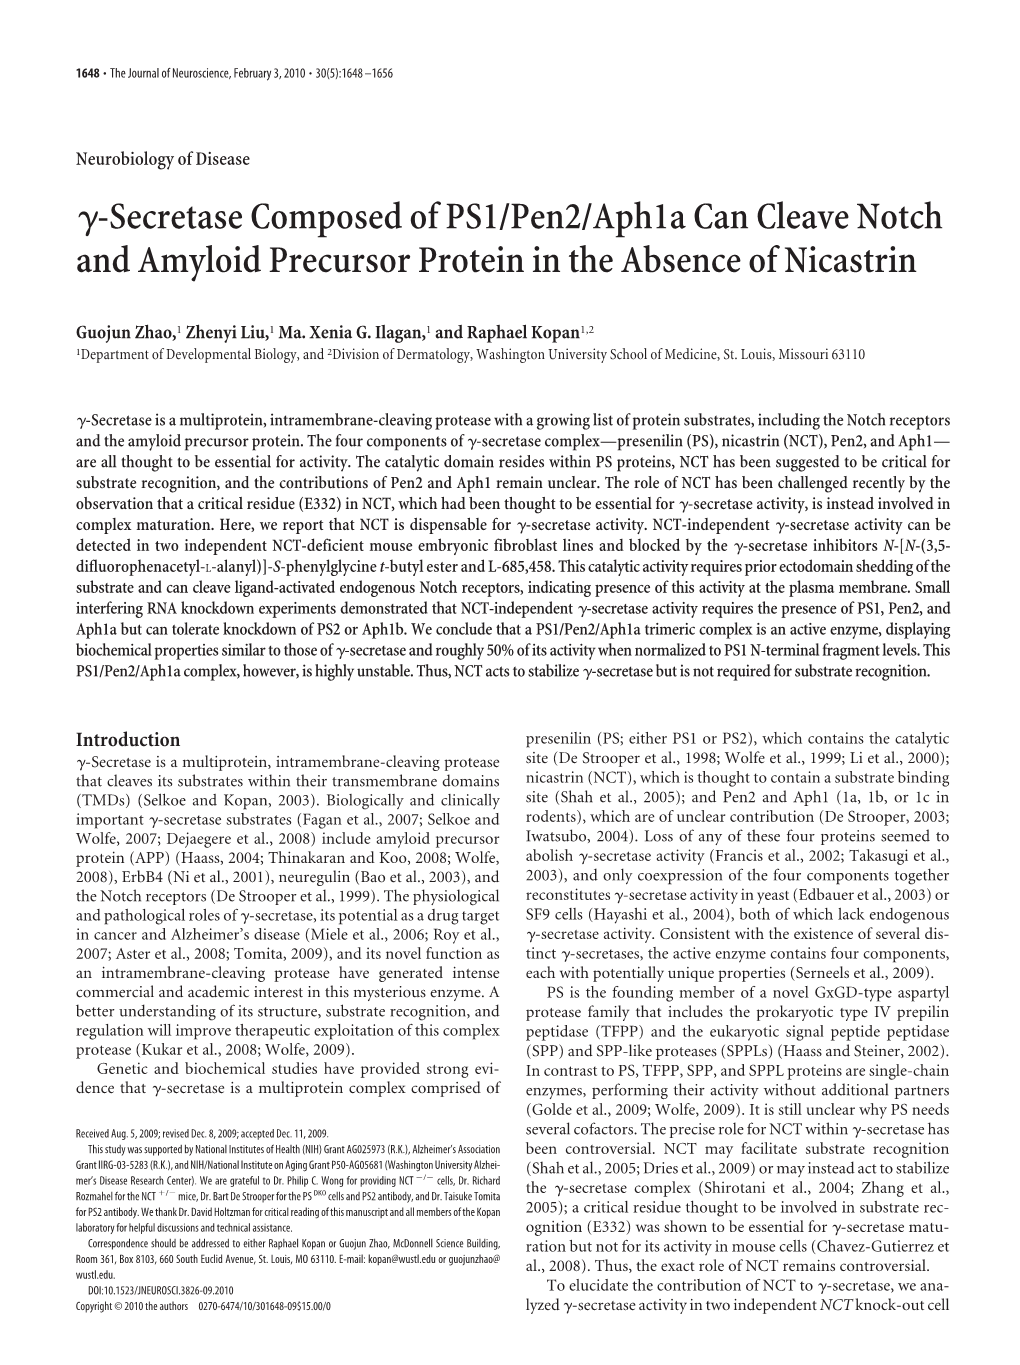 Secretase Composed of PS1/Pen2/Aph1a Can Cleave Notch and Amyloid Precursor Protein in the Absence of Nicastrin